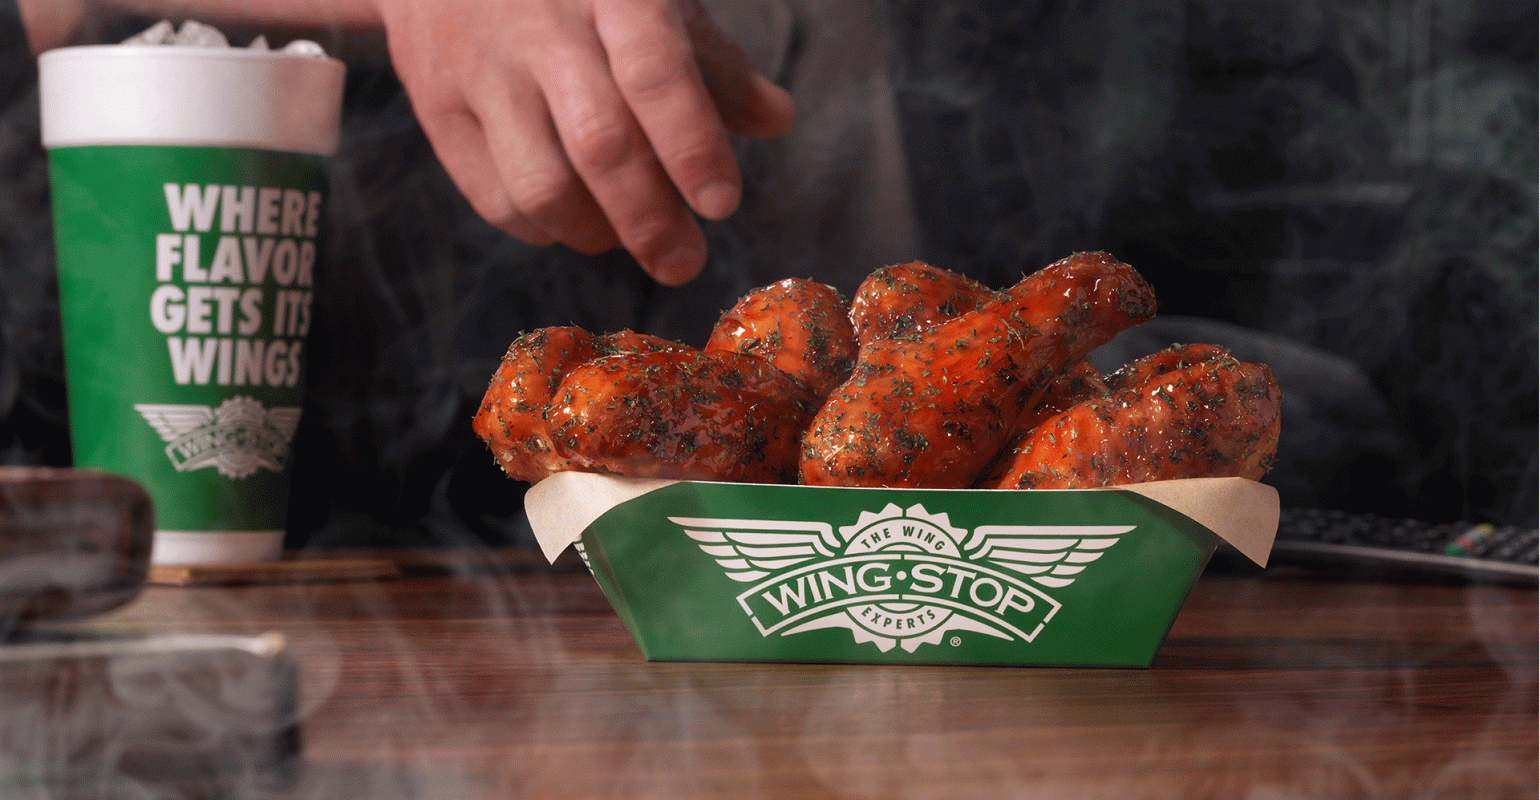 View Our Wingstop Menu to Start Your Order!